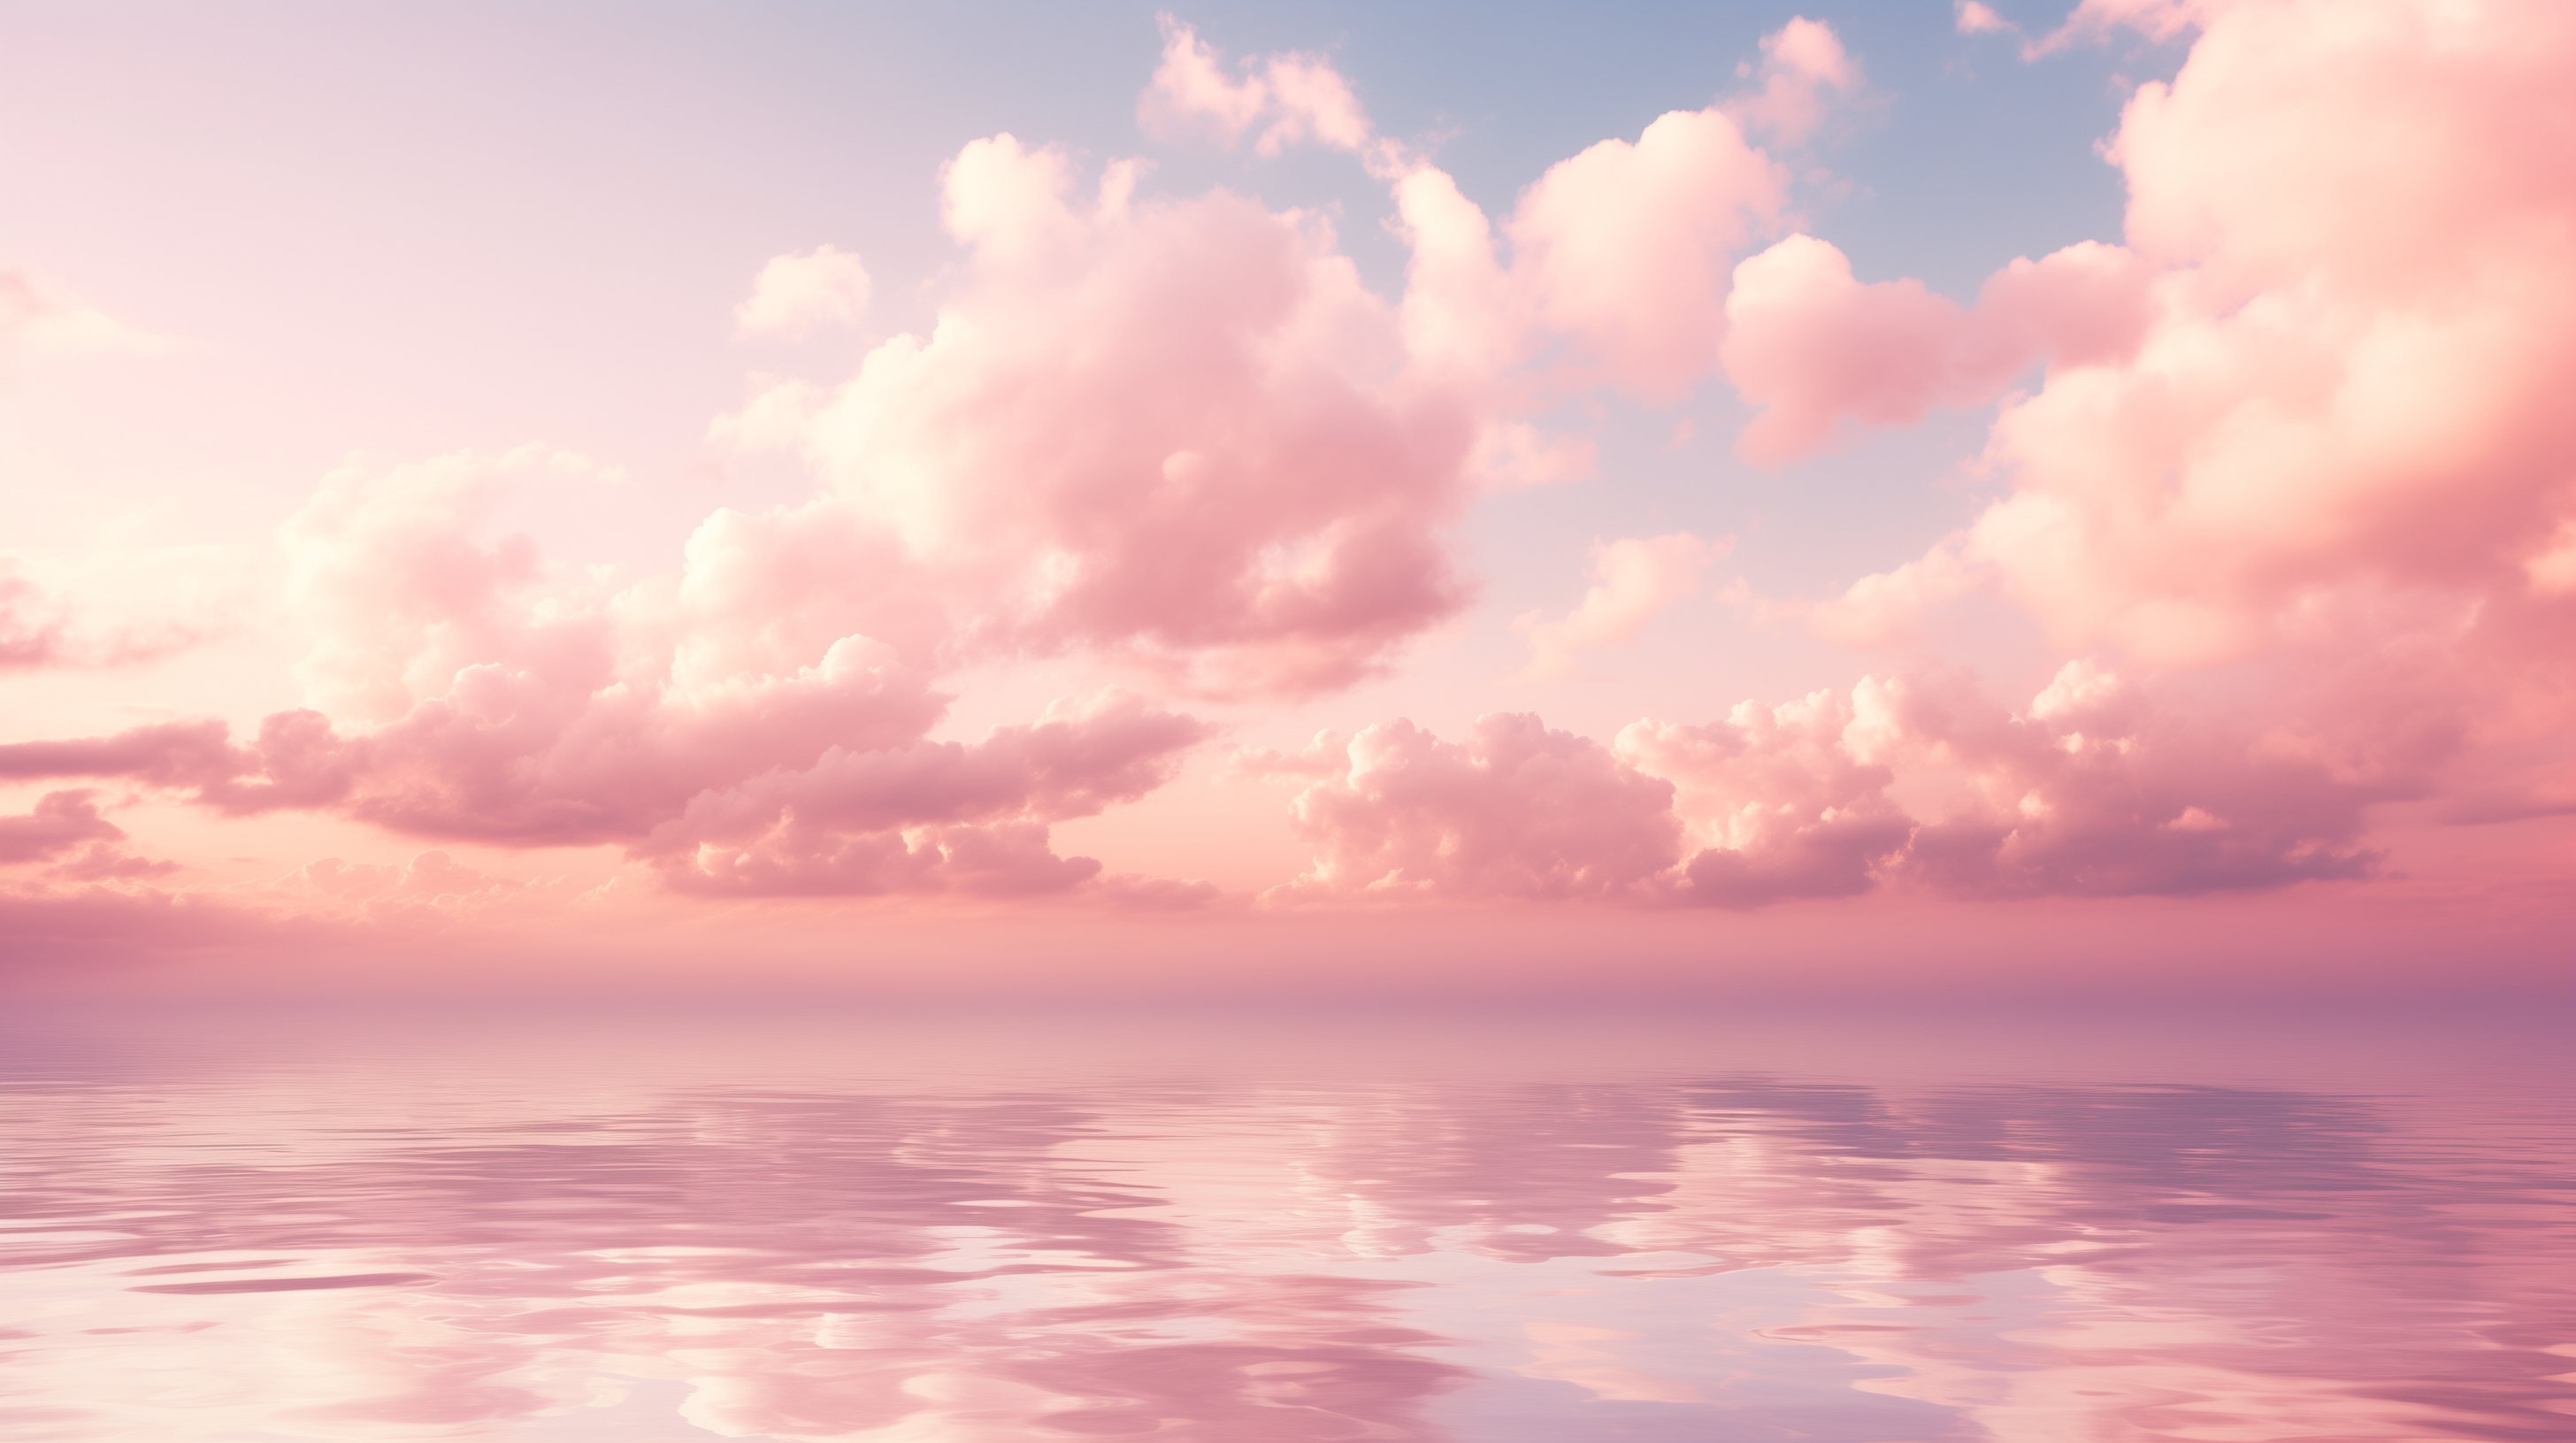 Calm And Beautiful Pink Aesthetic Sky Wallpaper By Patrika